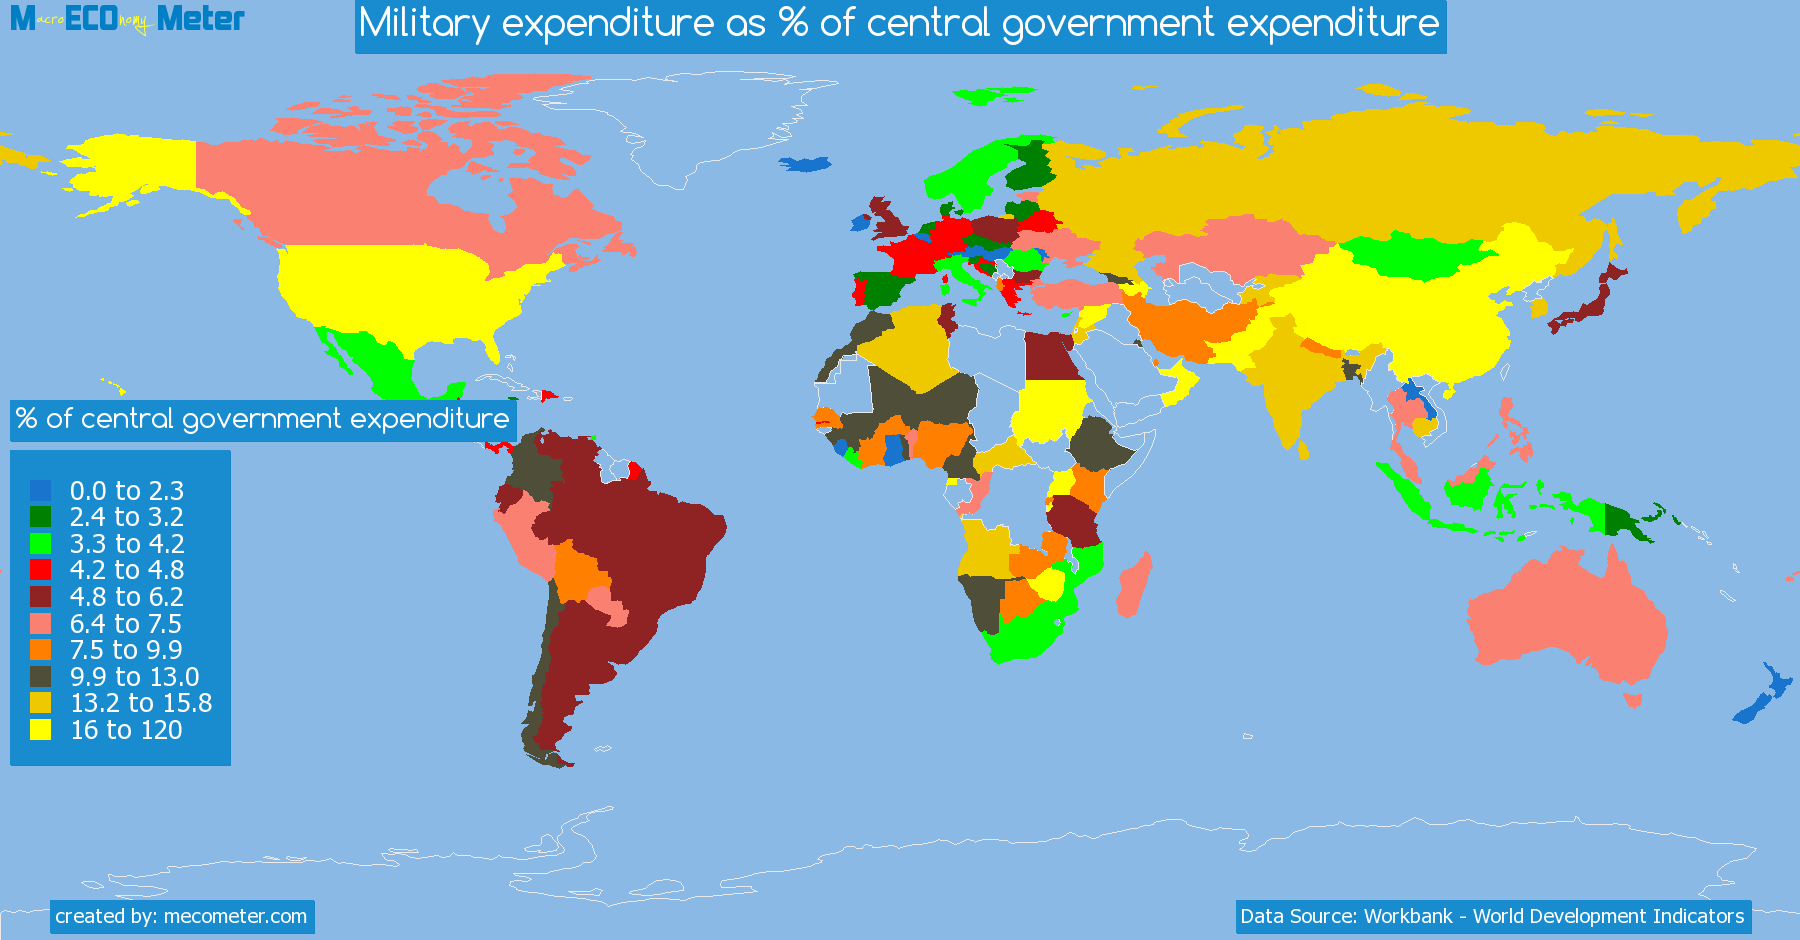 list of countries by Military expenditure as % of central government expenditure